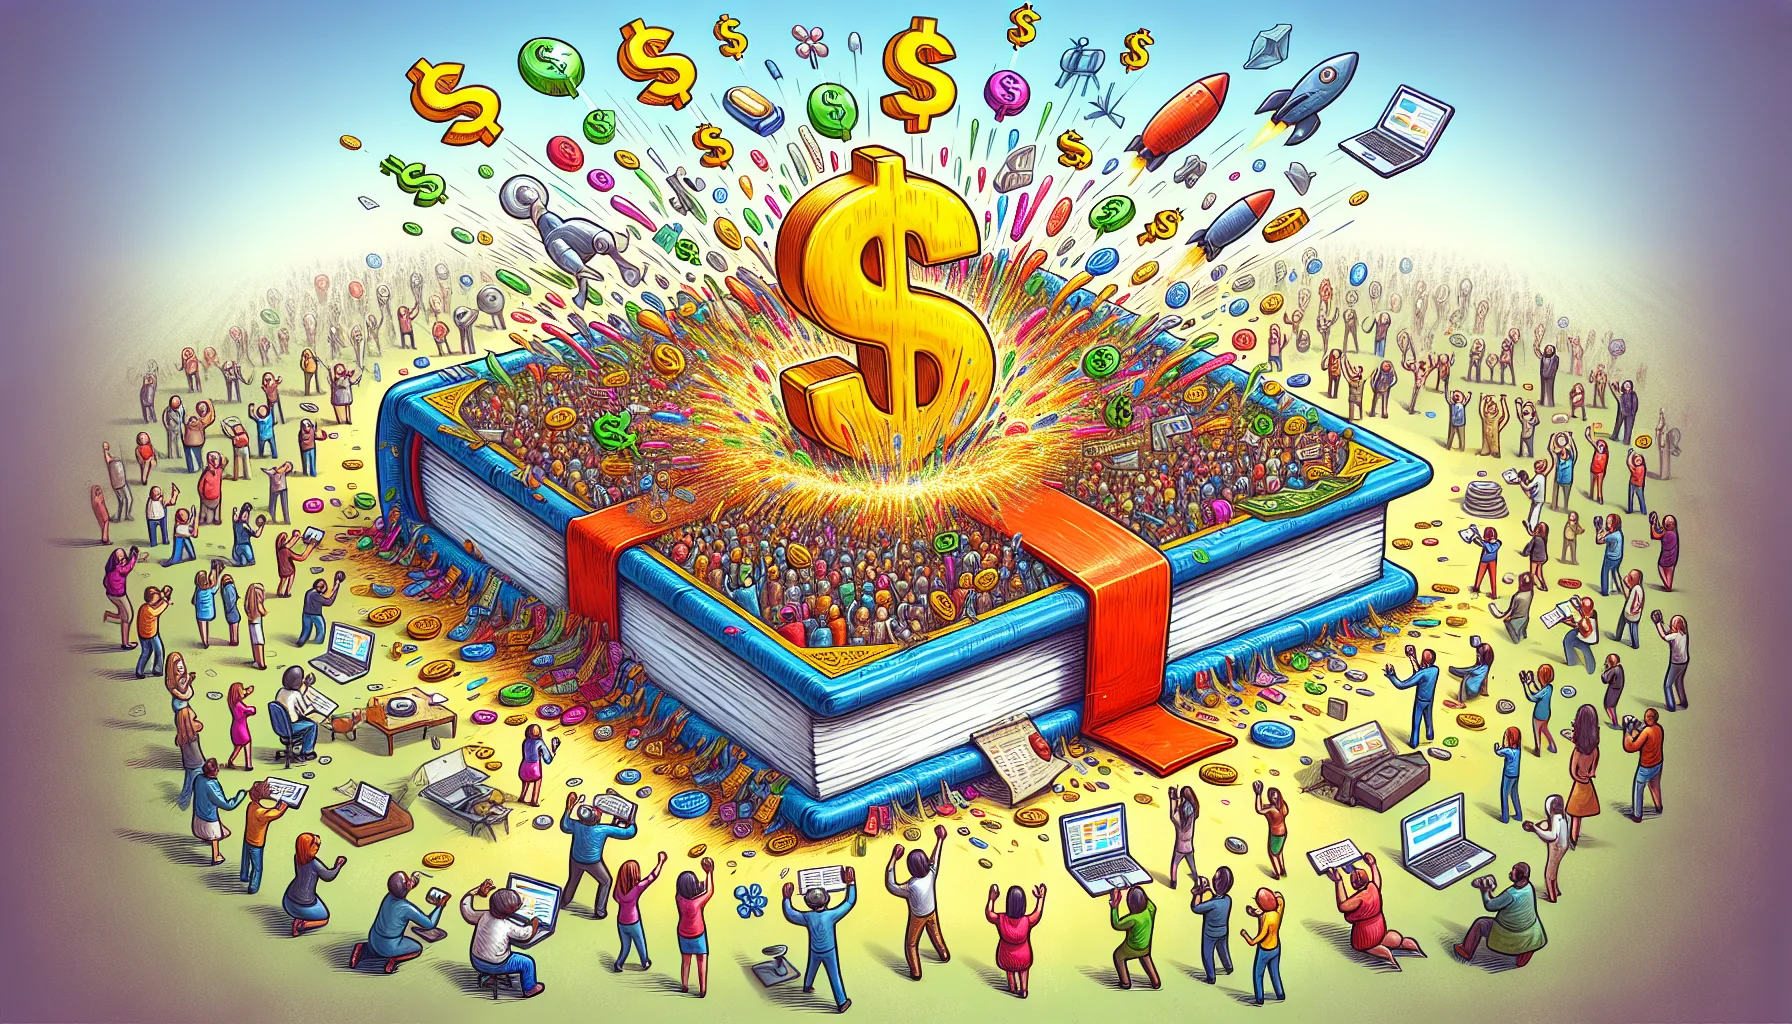 Imagine an engaging, comedic scenario related to online freelancing or entrepreneurship. A remarkably large-sized, colorful book rests at the center of the chaos. The book, titled 'The Golden Rules of Affiliate Marketing', shines brilliantly as if it's gleaming with the promise of future wealth. Cartoony dollar signs spring from the book, symbolizing its financial advice. Around it, a mishmash of web-related elements overflows - laptops, website icons, and online shopping carts. In the background, stick drawings of people displaying diverse ethnicities and genders appear, all eager to grab the book, depicting the competitiveness in the world of online money-making.